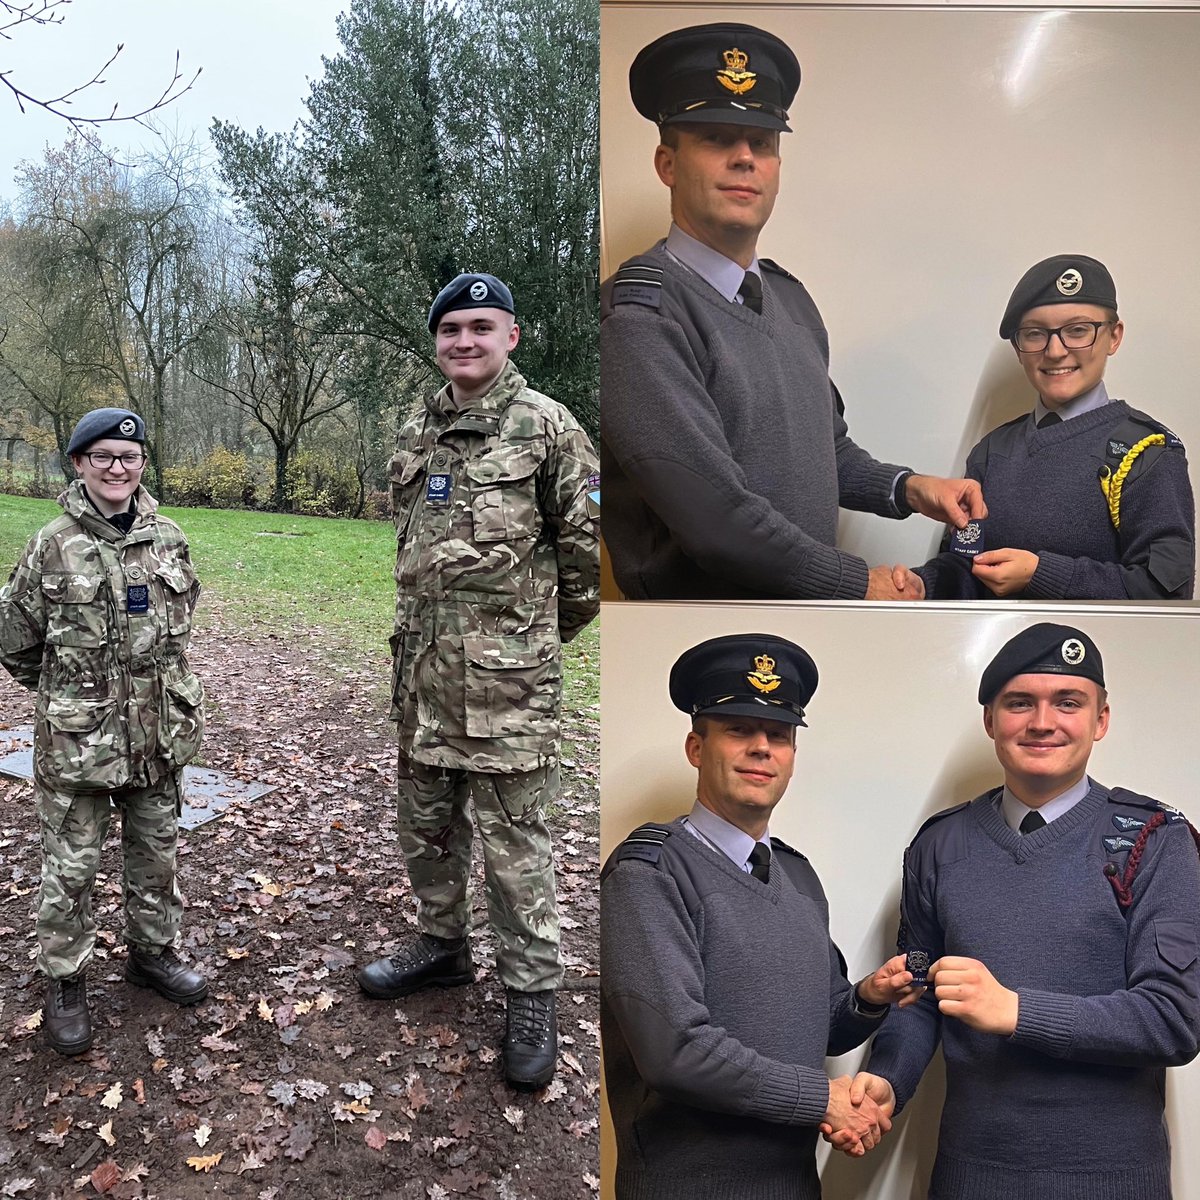 Congratulations to the newest members of our Cadet Warrant Officer cadre. CWO Williams and Sutton from @1211AirCadets. We look forward to seeing you both continue to progress and fro you supporting the wider Wing.